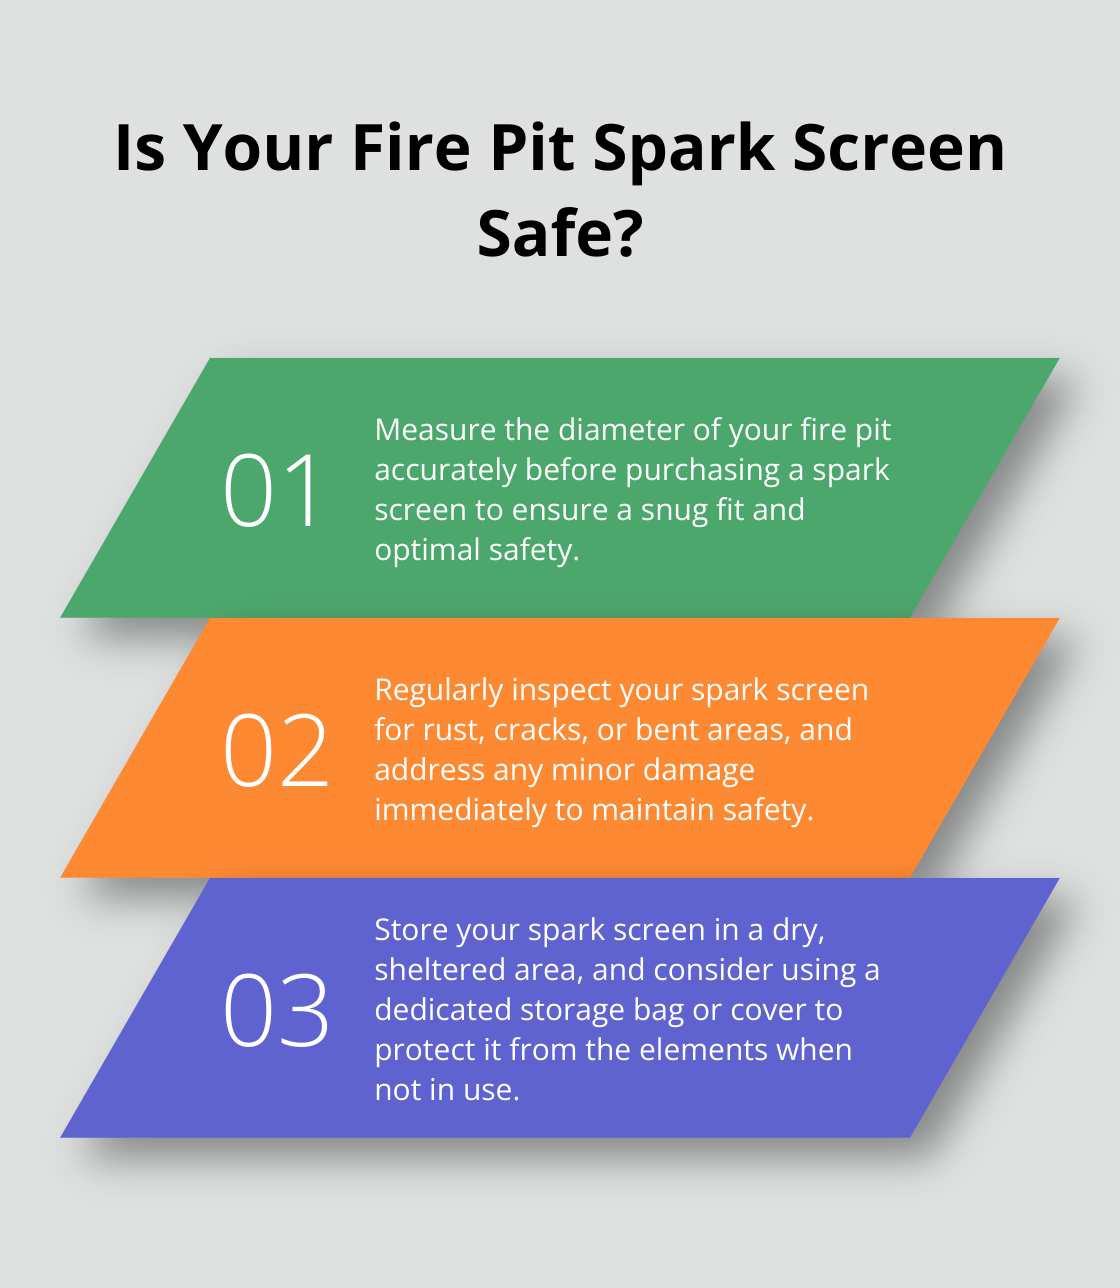 Fact - Is Your Fire Pit Spark Screen Safe?